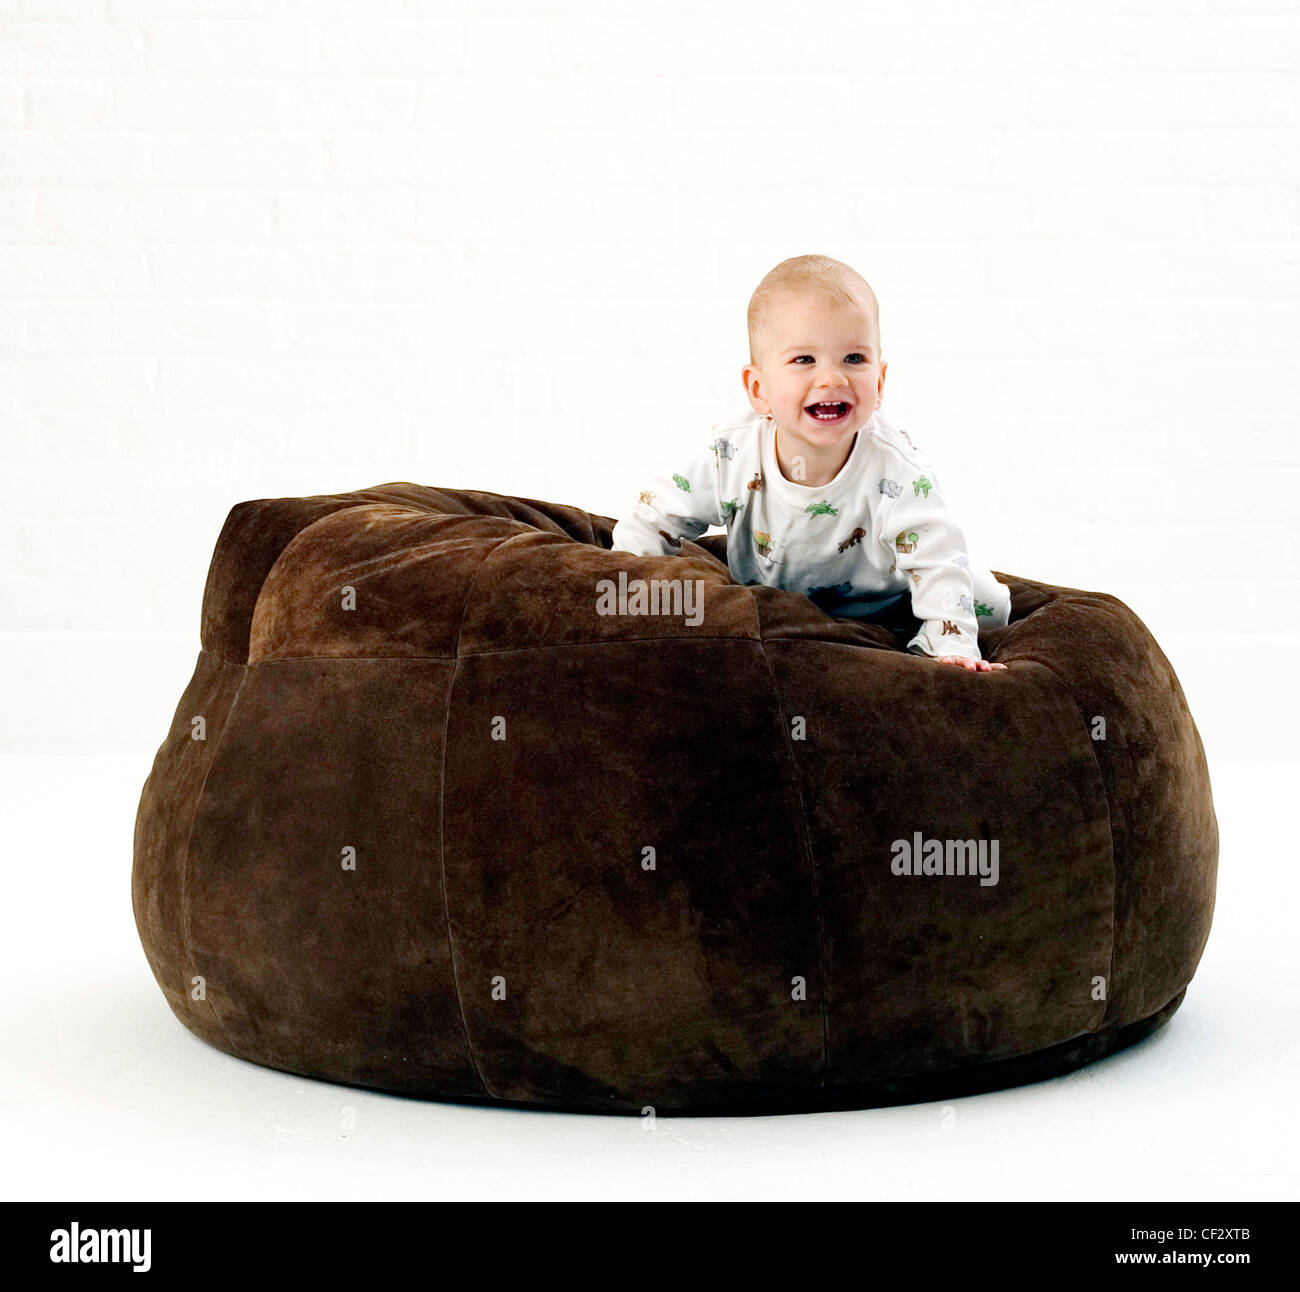 Male baby wearing white patterned babygro, crawling on large brown suede beanbag looking to distance smiling, against white Stock Photo